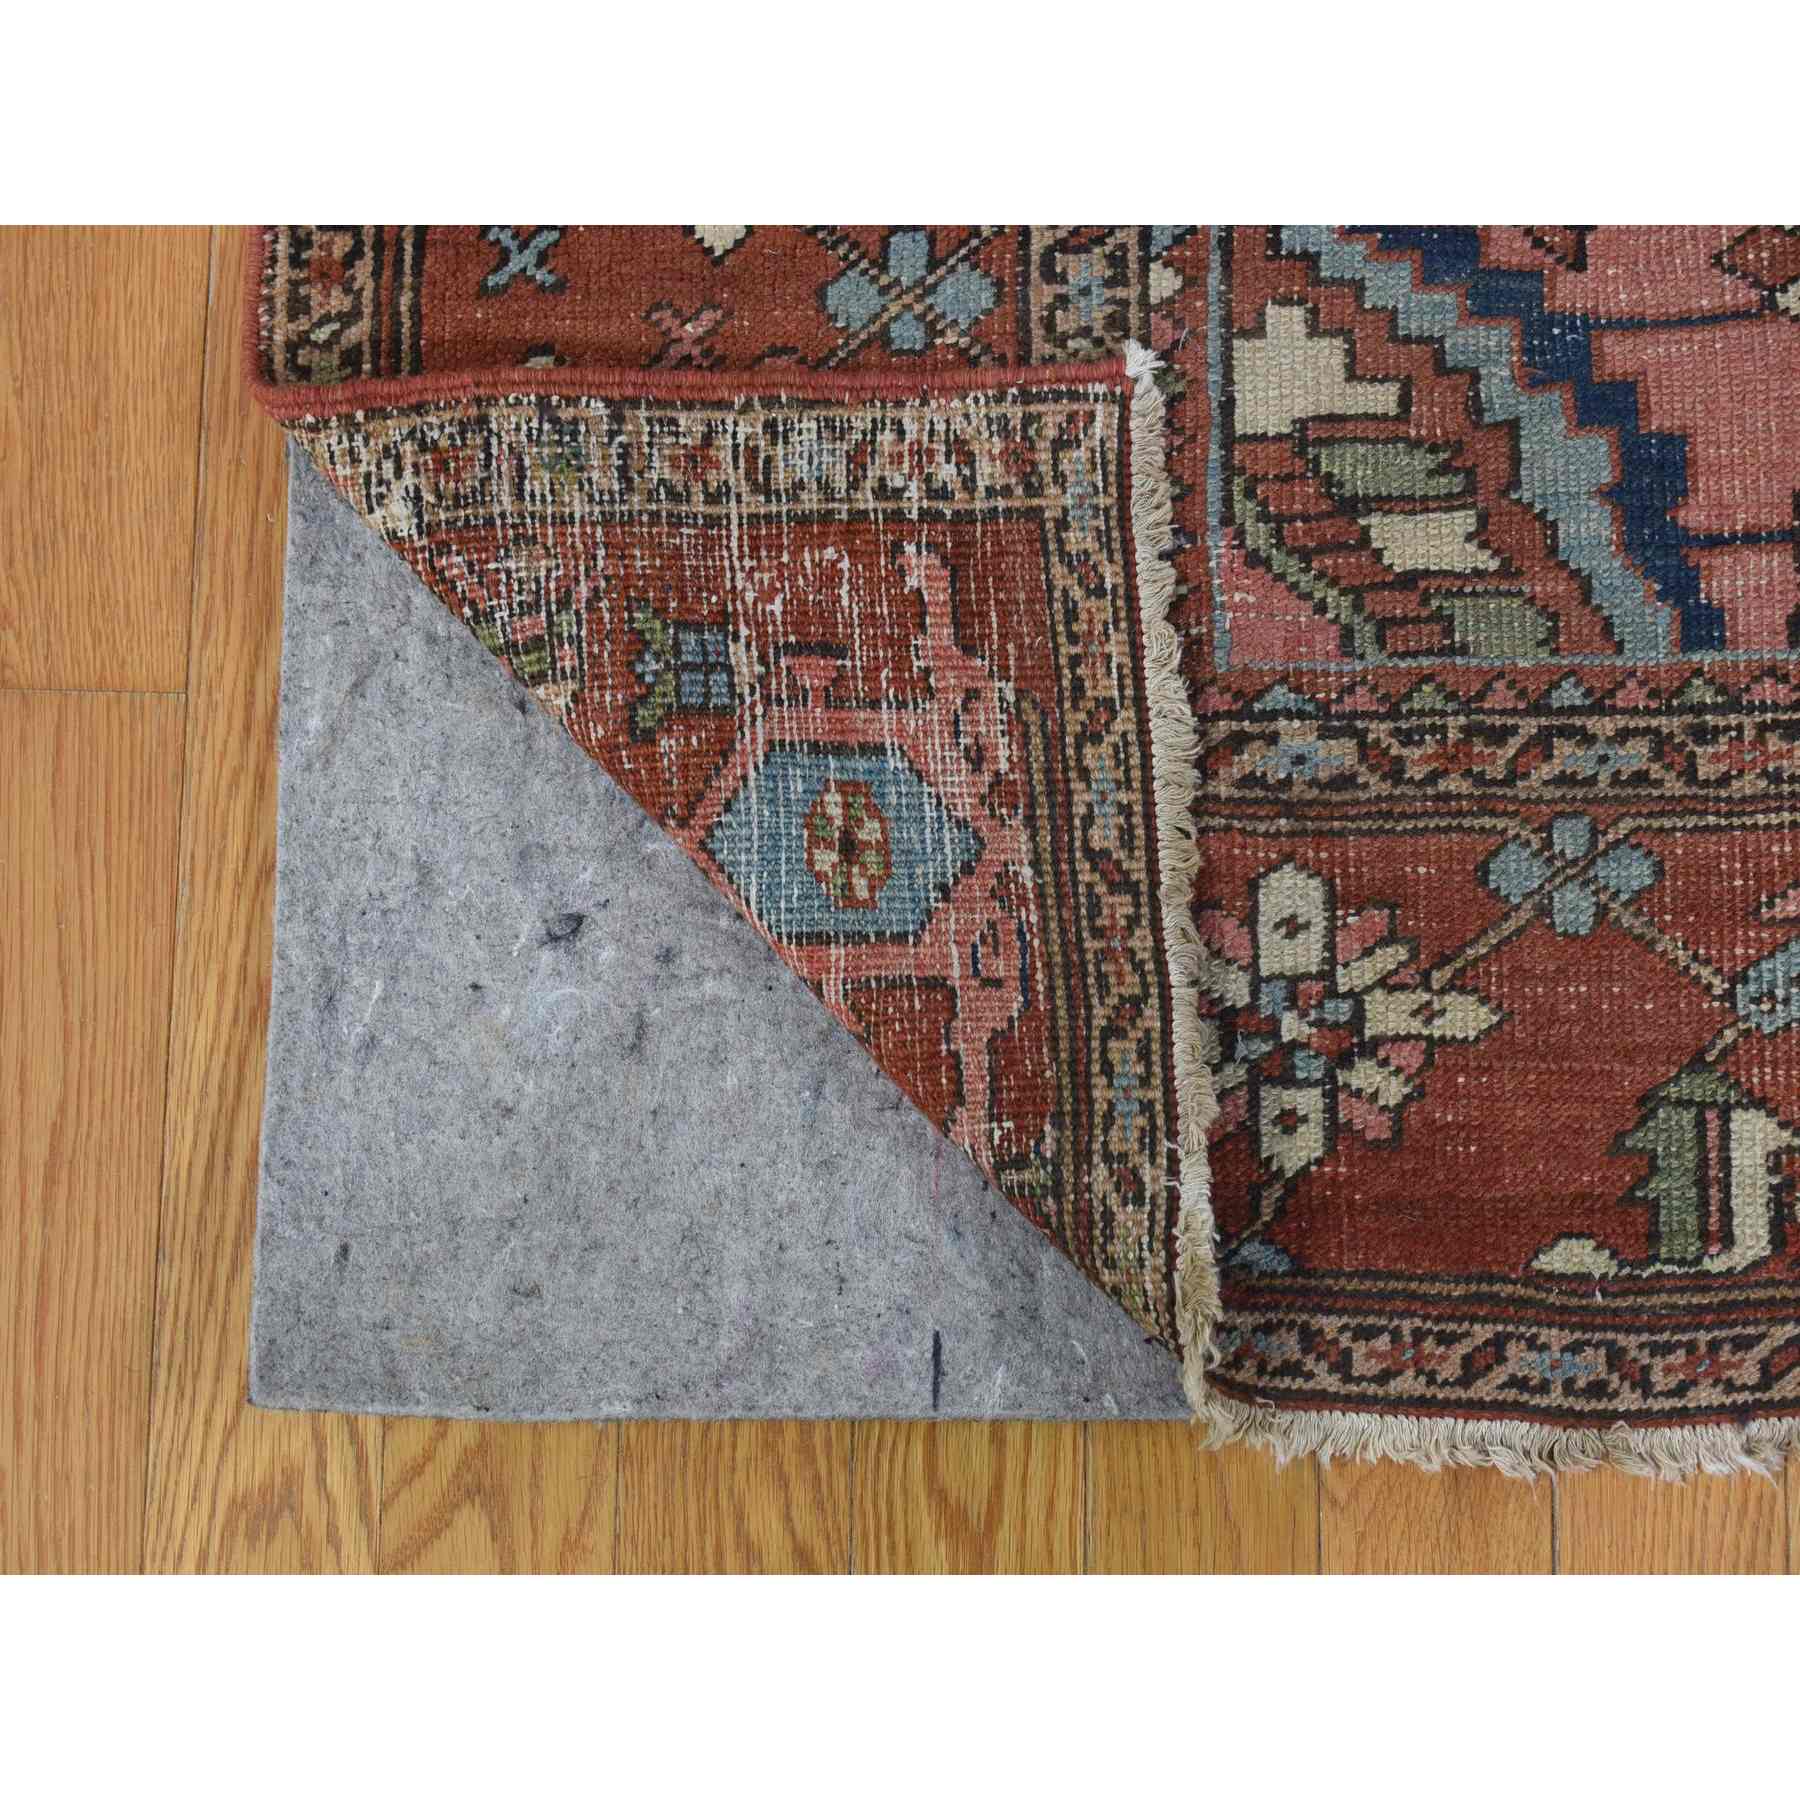 Antique-Hand-Knotted-Rug-400260